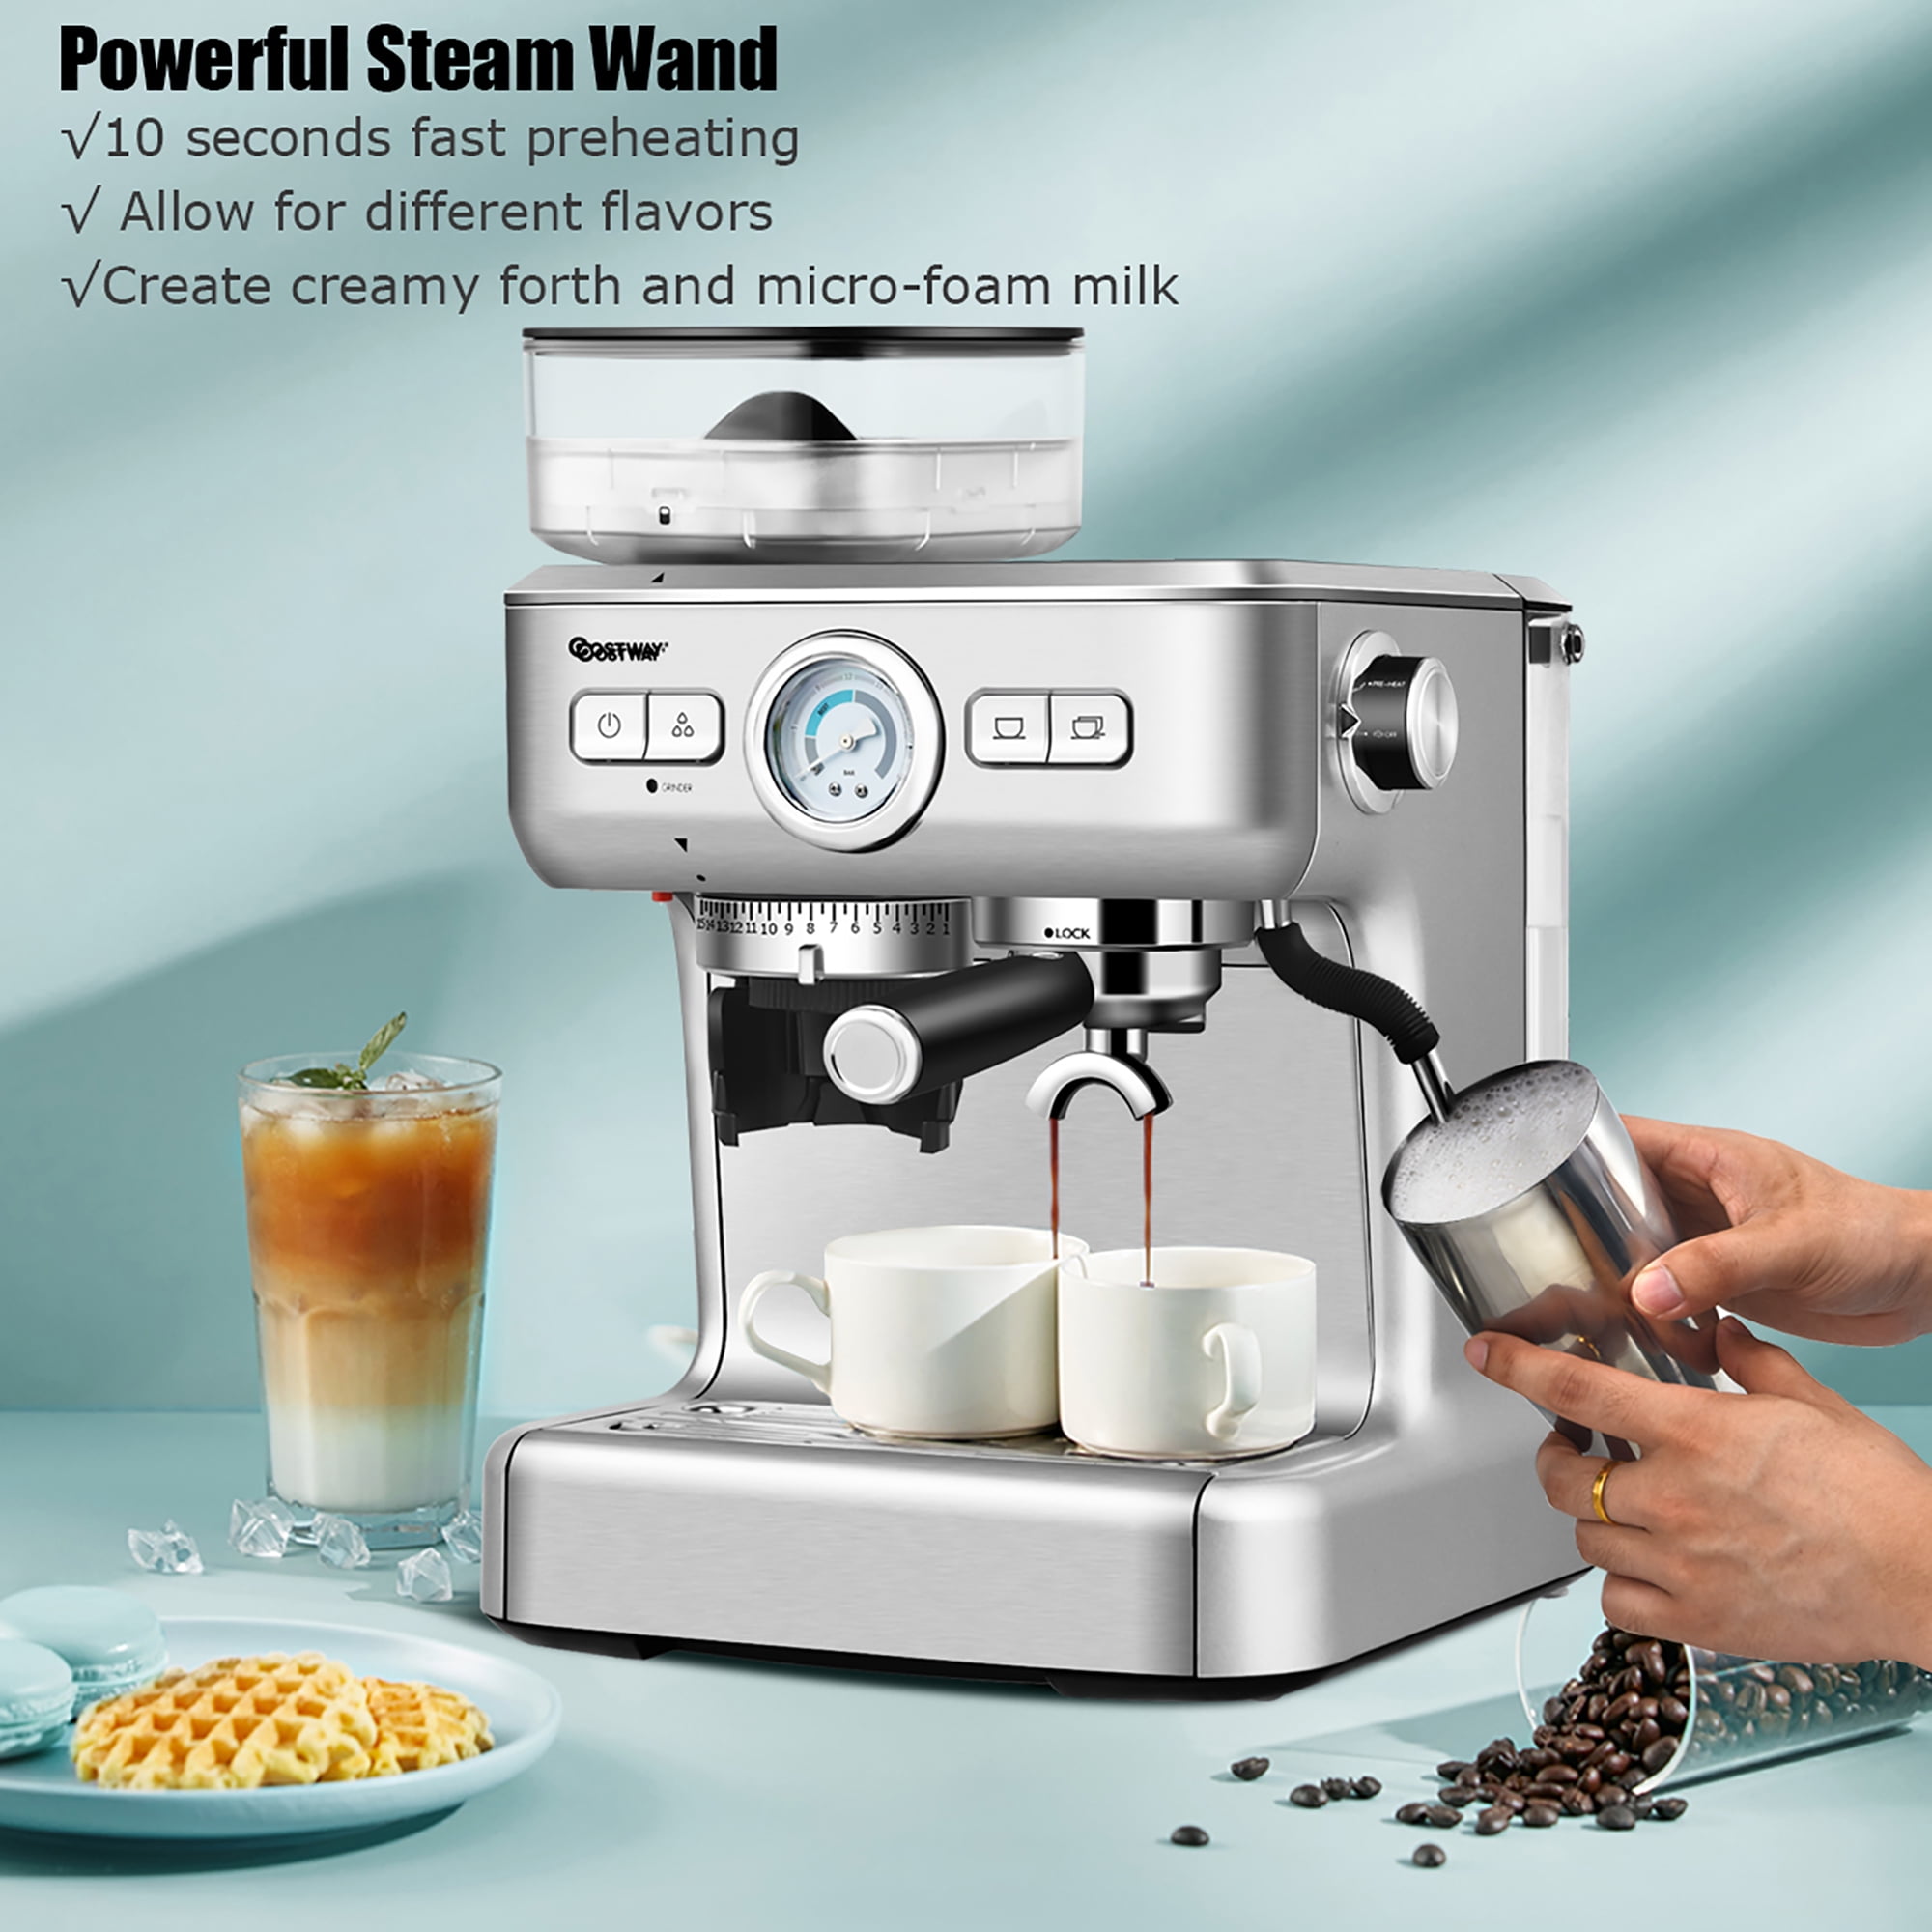 Costway Electric Automatic Milk Frother Warmer Heater Foam Maker For -  6.5'' x 4'' x 7'' - Bed Bath & Beyond - 22400292